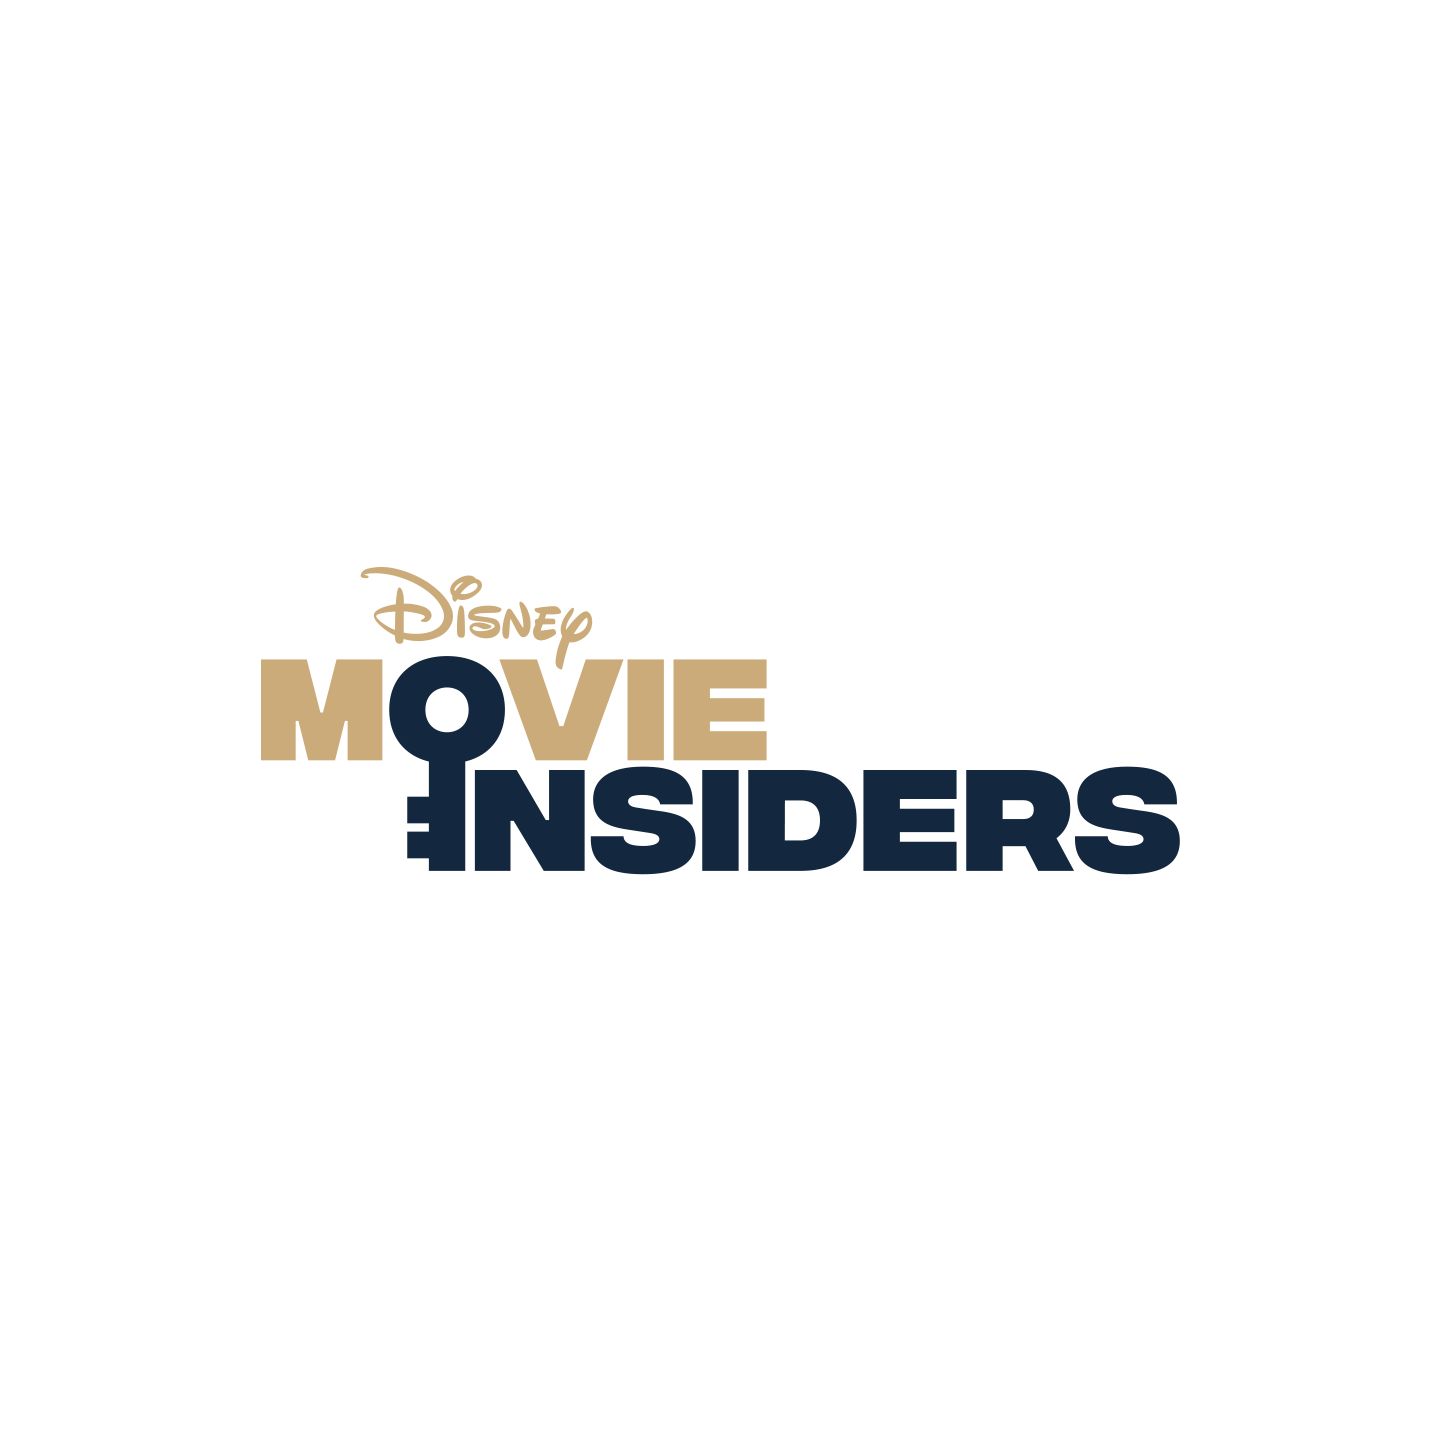 Disney Movie Insiders Presents - AN INSIDER LOOK AT LAUNCHPAD - Meet the 6 filmmakers from Disney's Launchpad and hear about the stories they brought to Disney+. LISTEN NOW